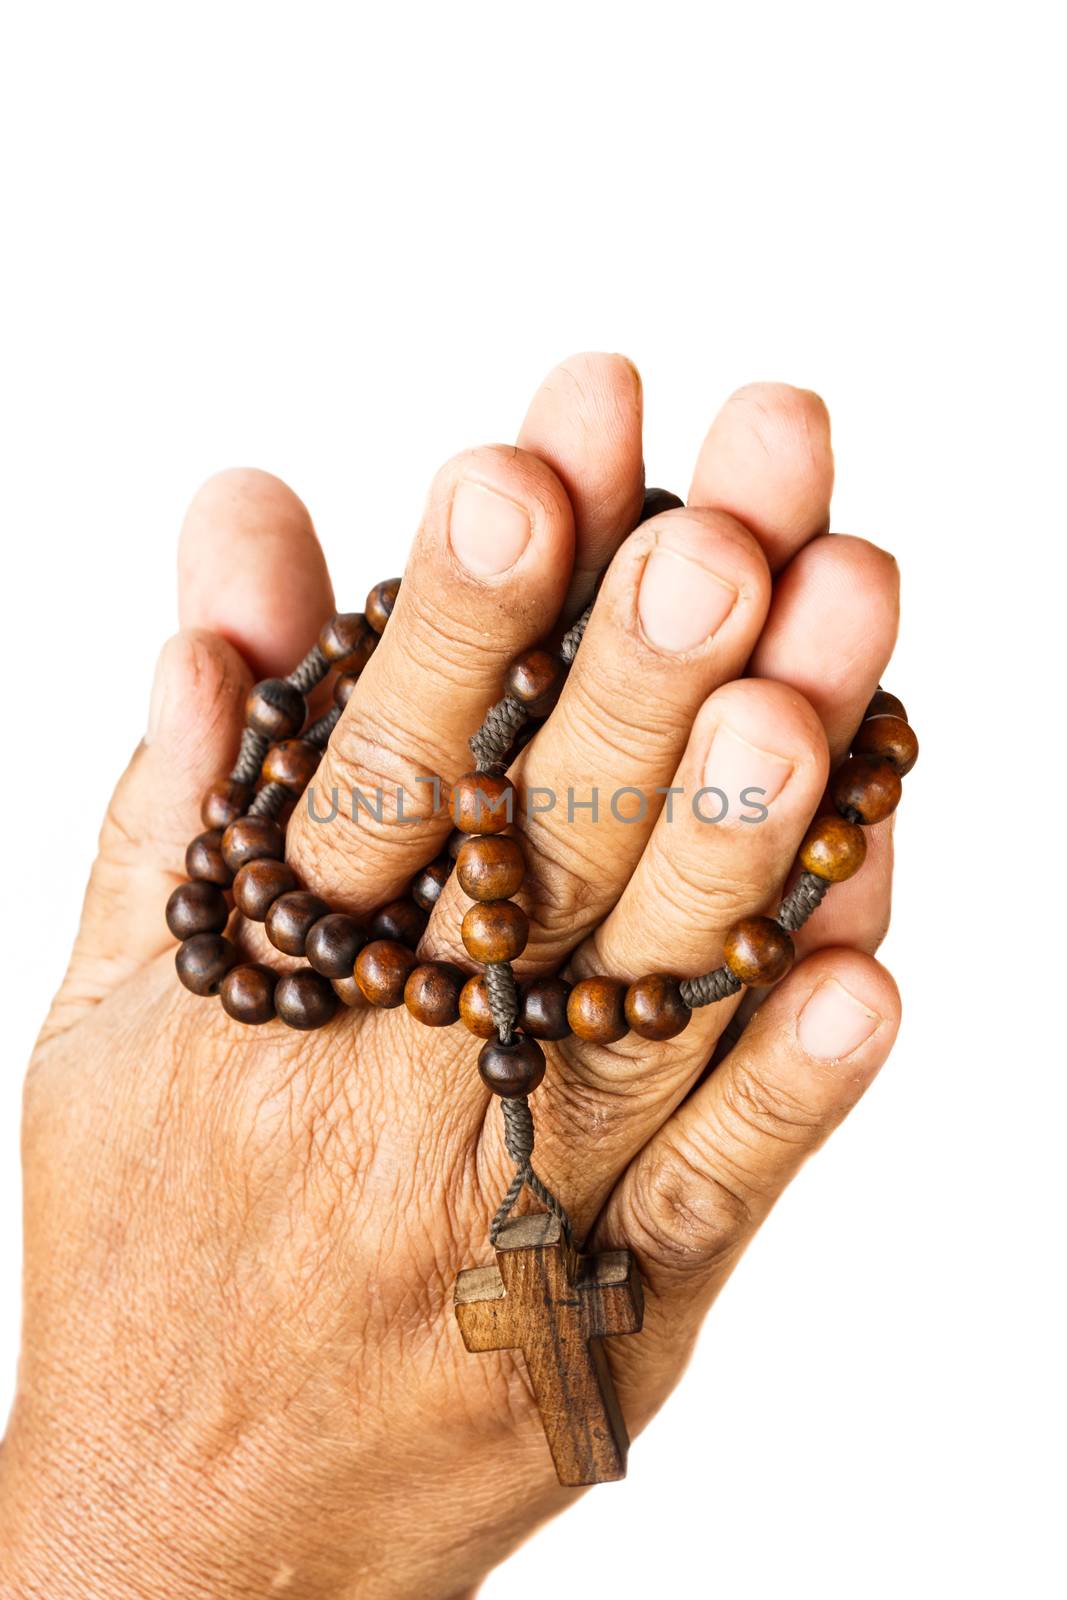 hands ware binded by wood rosary by stockdevil